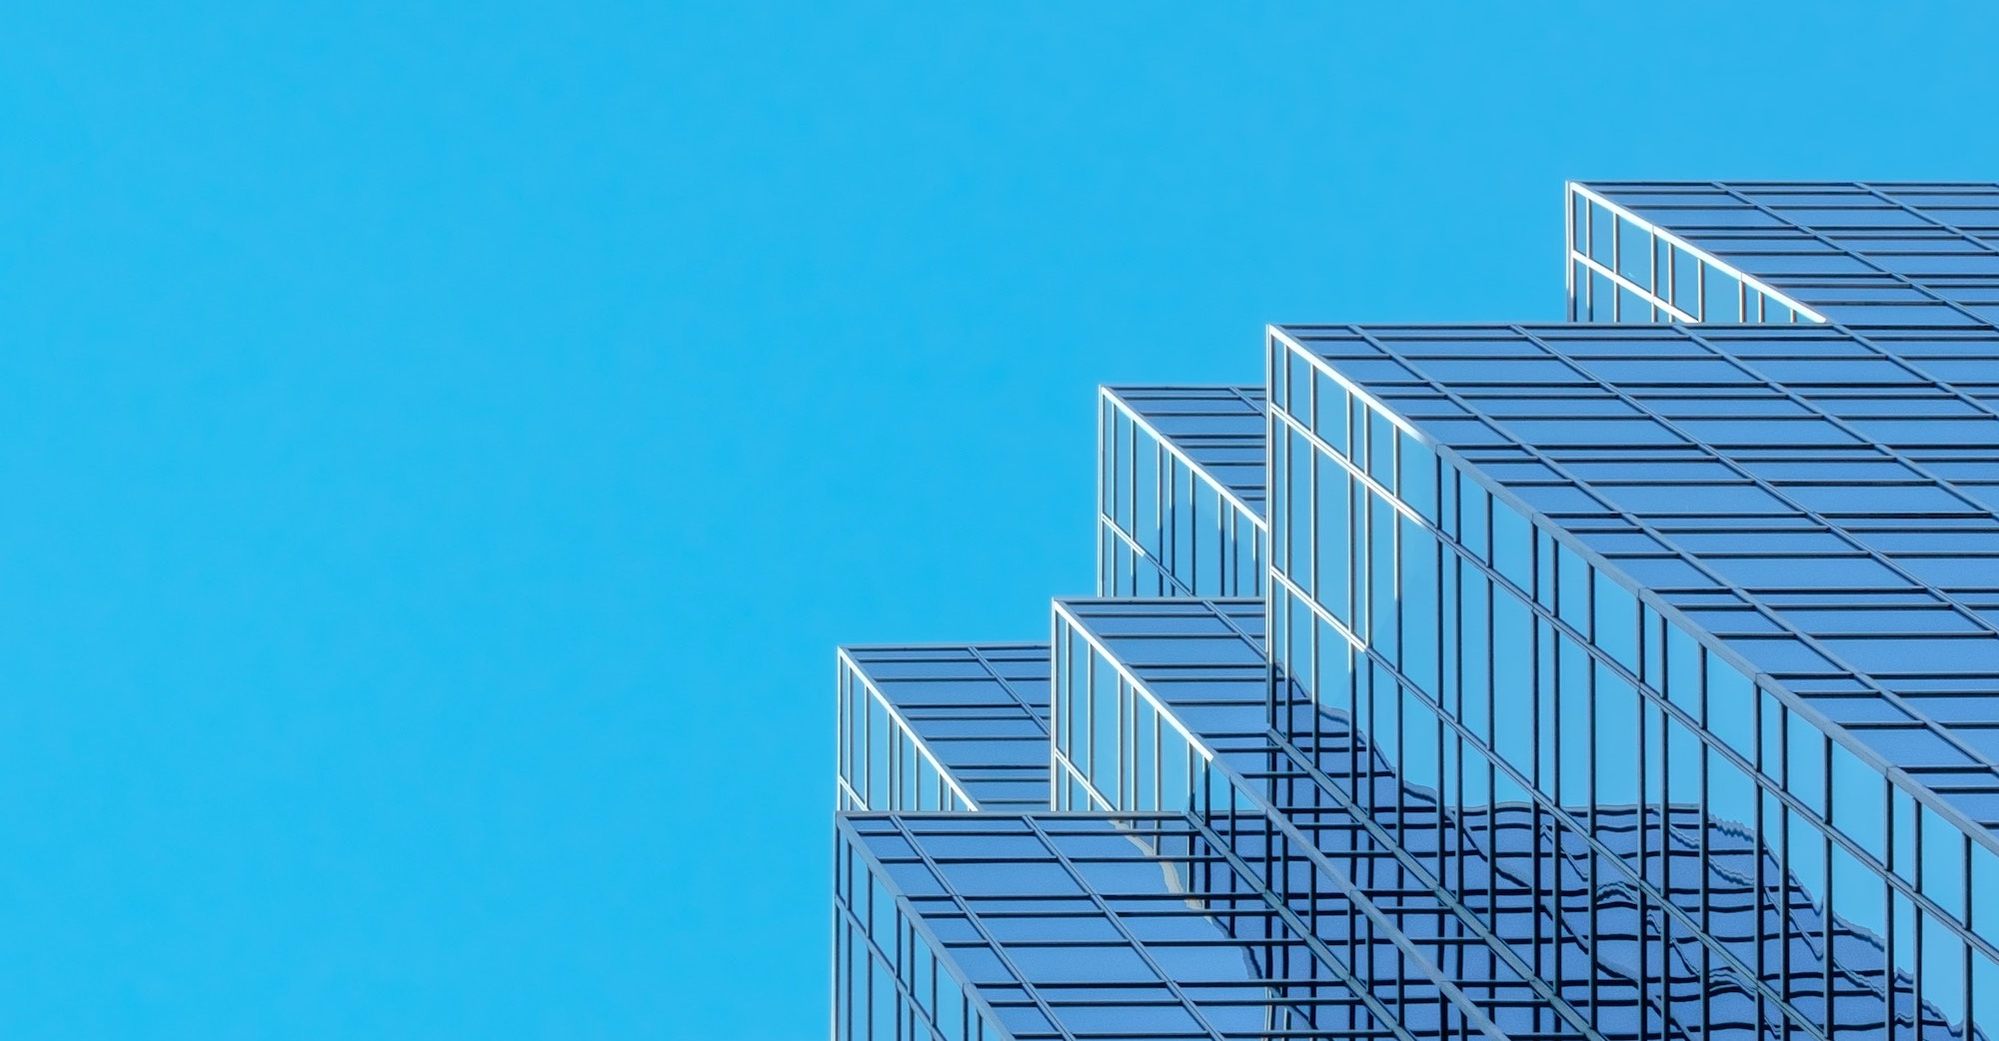 Image shows high-rise architecture under a bright blue sky